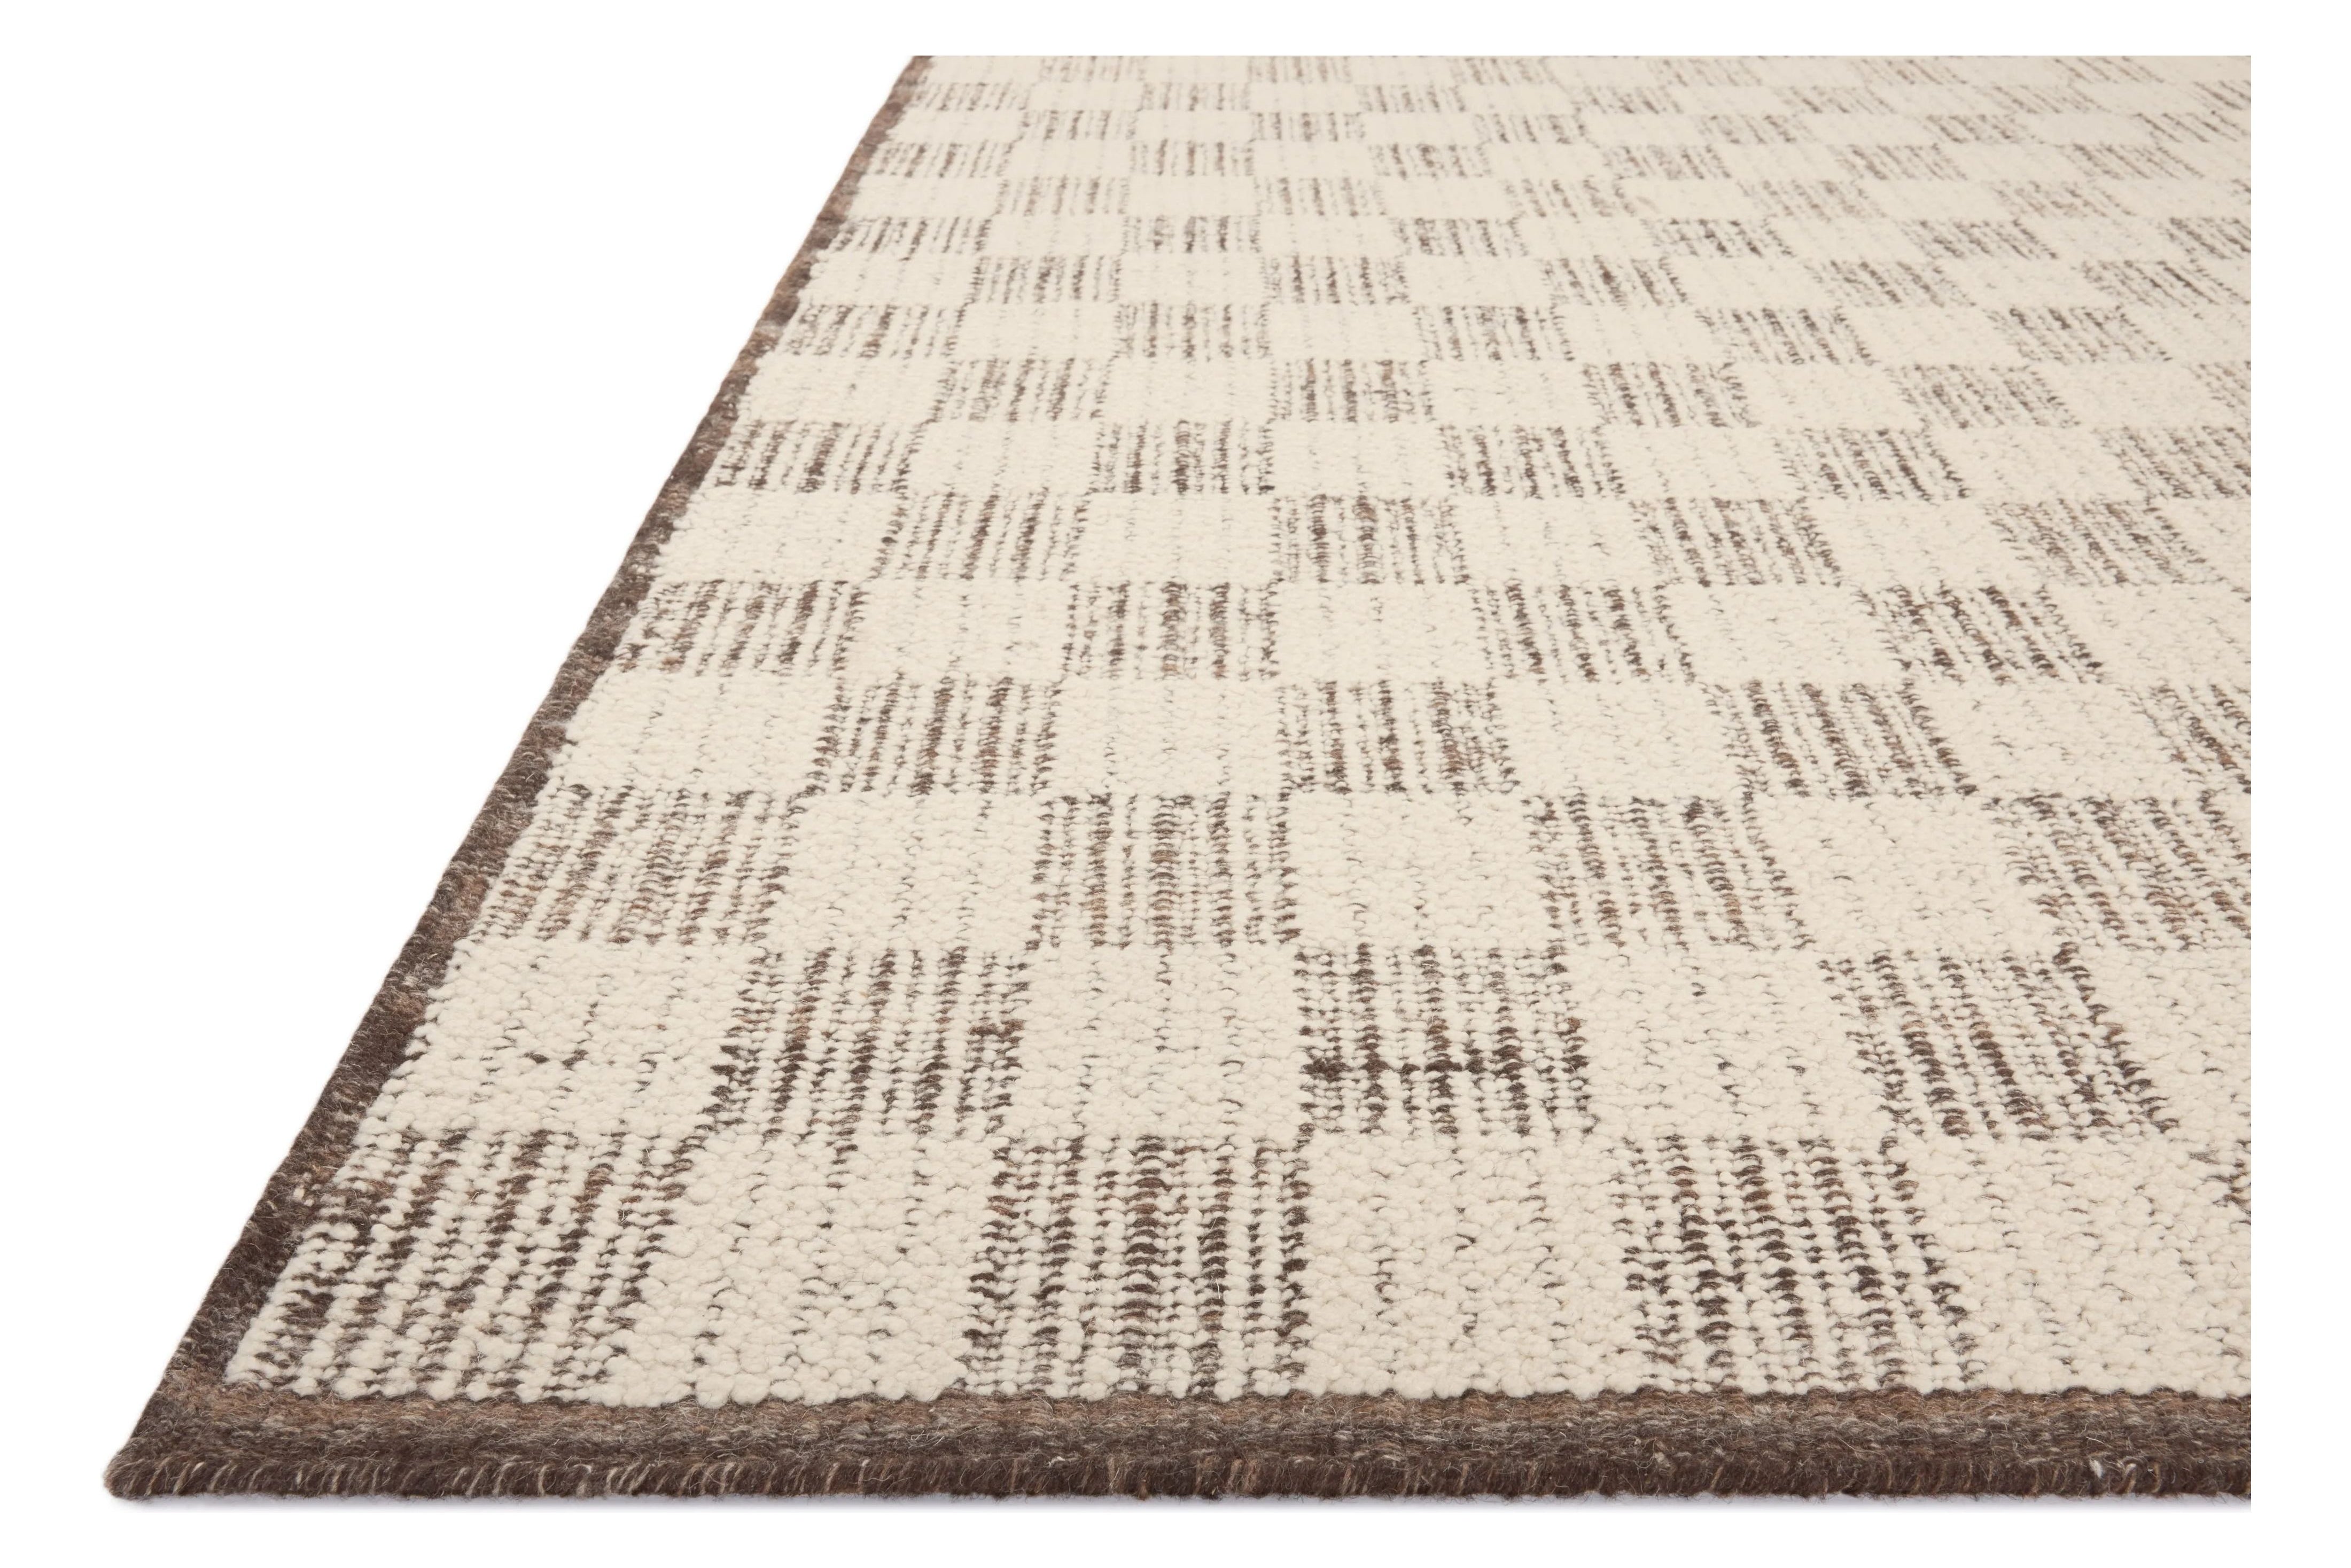 The Knox Ivory / Mocha Rug by Brigette Romanek x Loloi is a handwoven area rug with a contemporary checkerboard pattern and a texture reminiscent of a luxurious knit sweater. Made of a blend of wool and cotton that plays with scale and texture, Knox is imbued with cozy luxury that can anchor any room. Amethyst Home provides interior design, new home construction design consulting, vintage area rugs, and lighting in the Salt Lake City metro area.